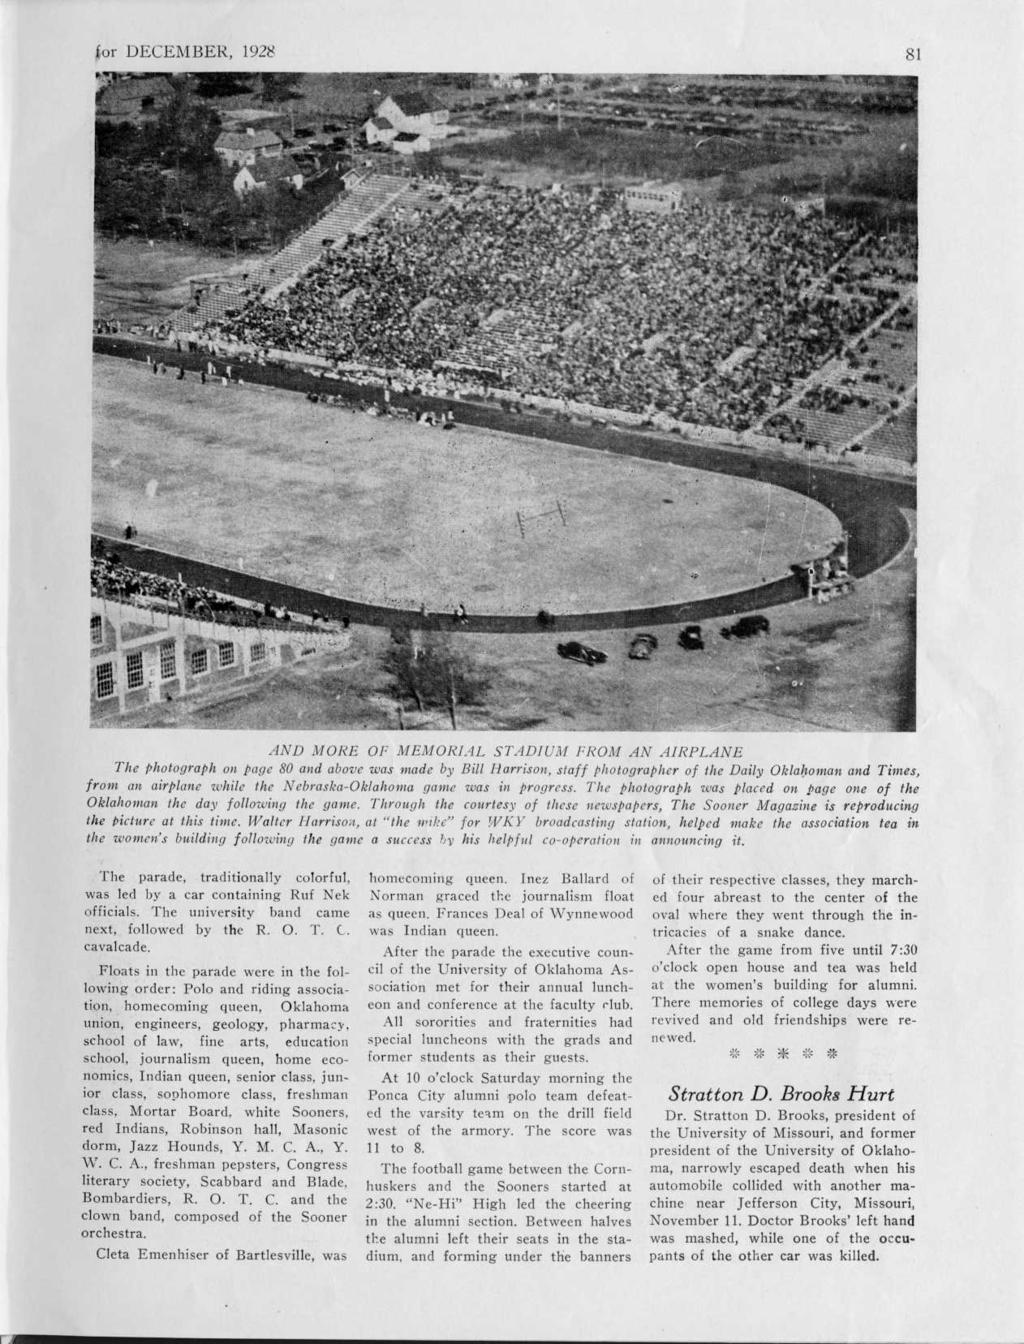 for DECEMBER, 1928 8 1 AND MORE OF MEMORIAL STADIUM FROM AN AIRPLANE The photograph on page 80 and above was made by Bill Ilarrison, staff photographer of the Daily Oklahoman and Times, front an